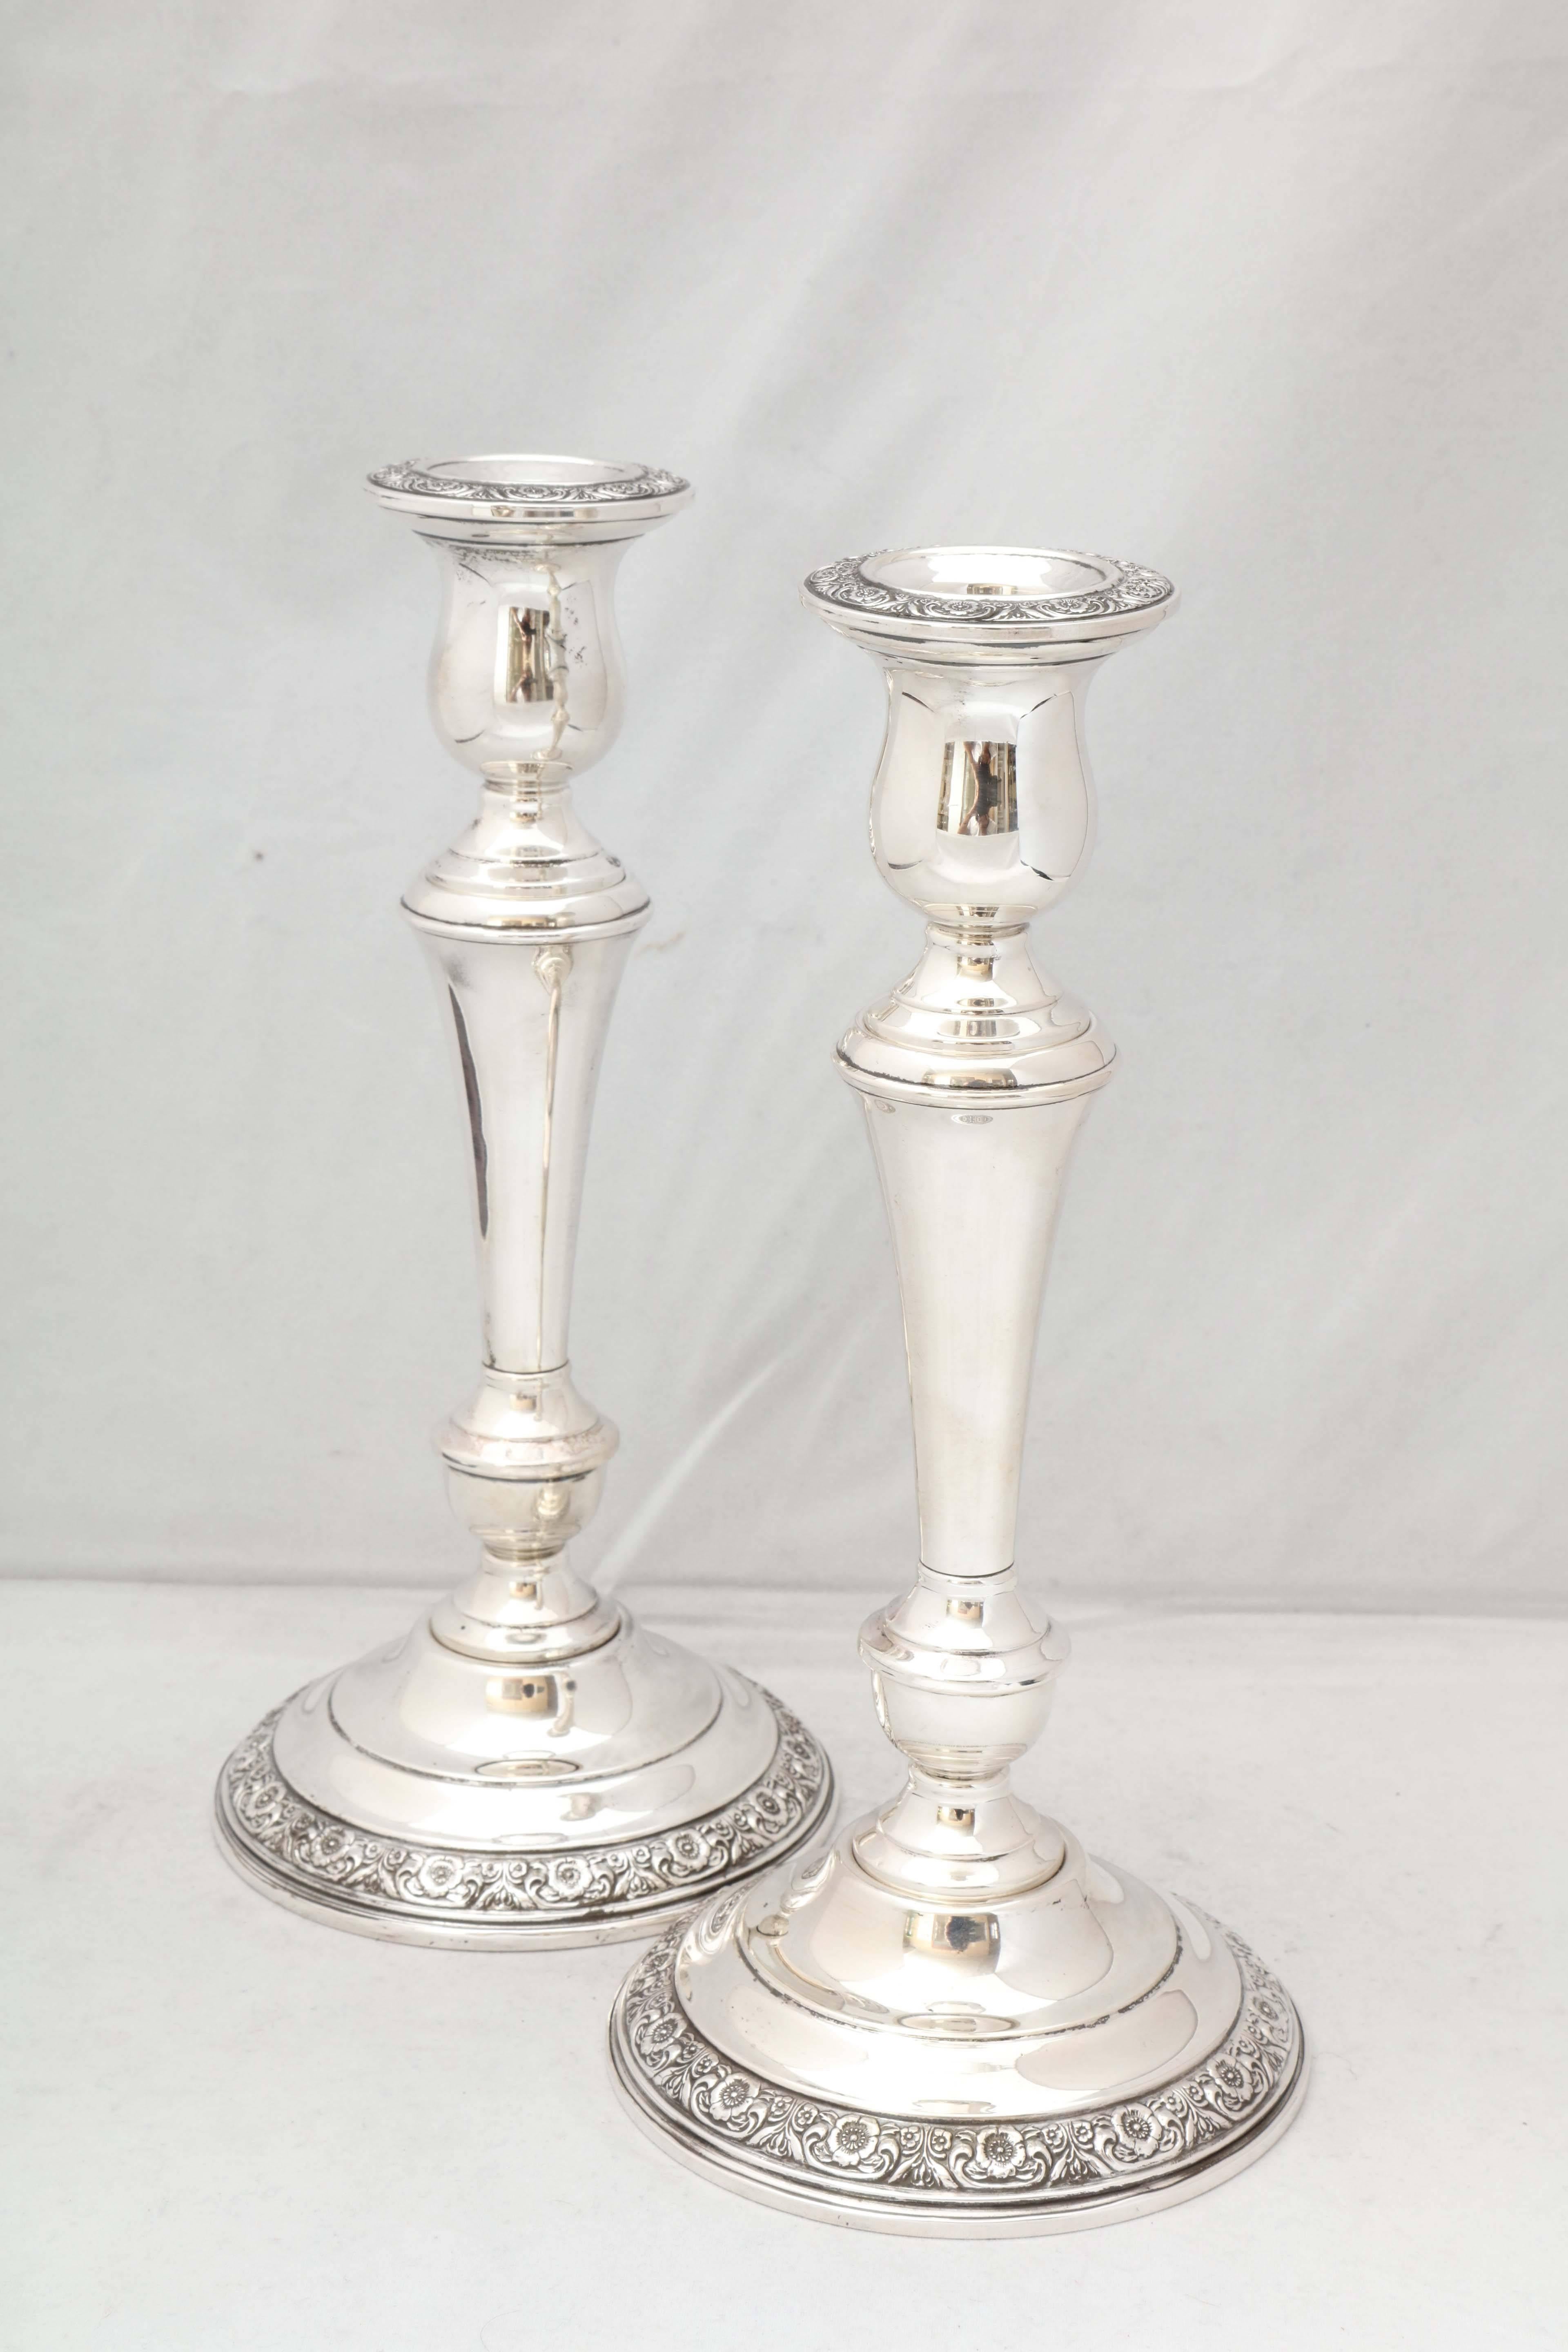 Pair of tall, sterling silver candlesticks in the 